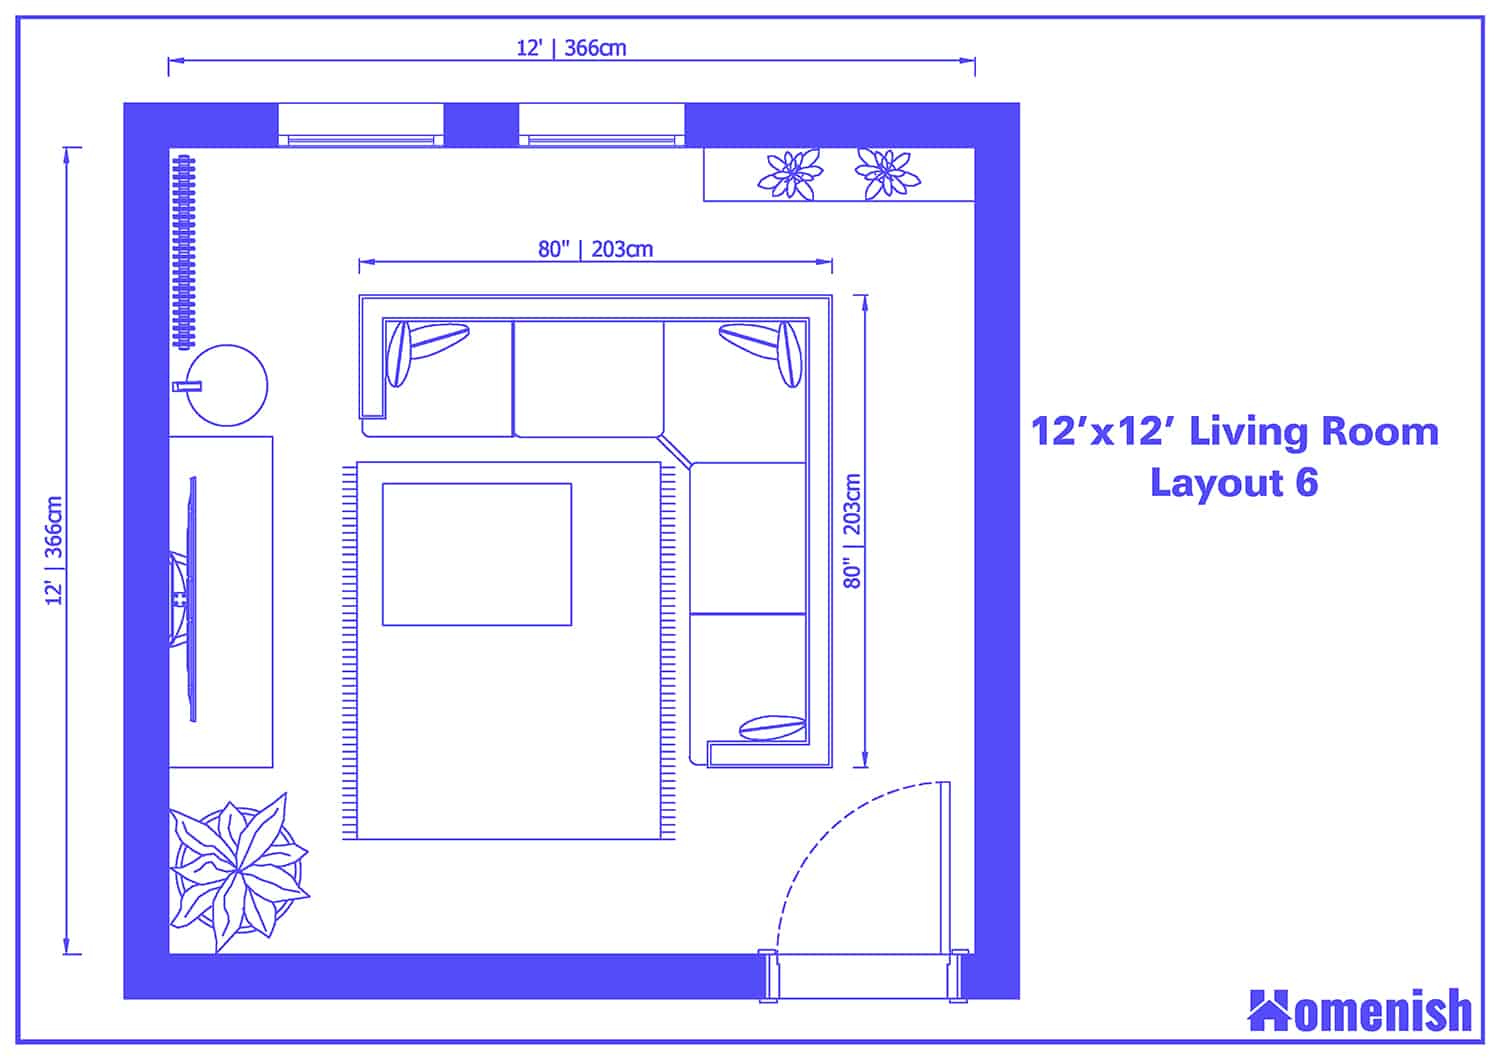 12' x 12' Living Room Layout 6